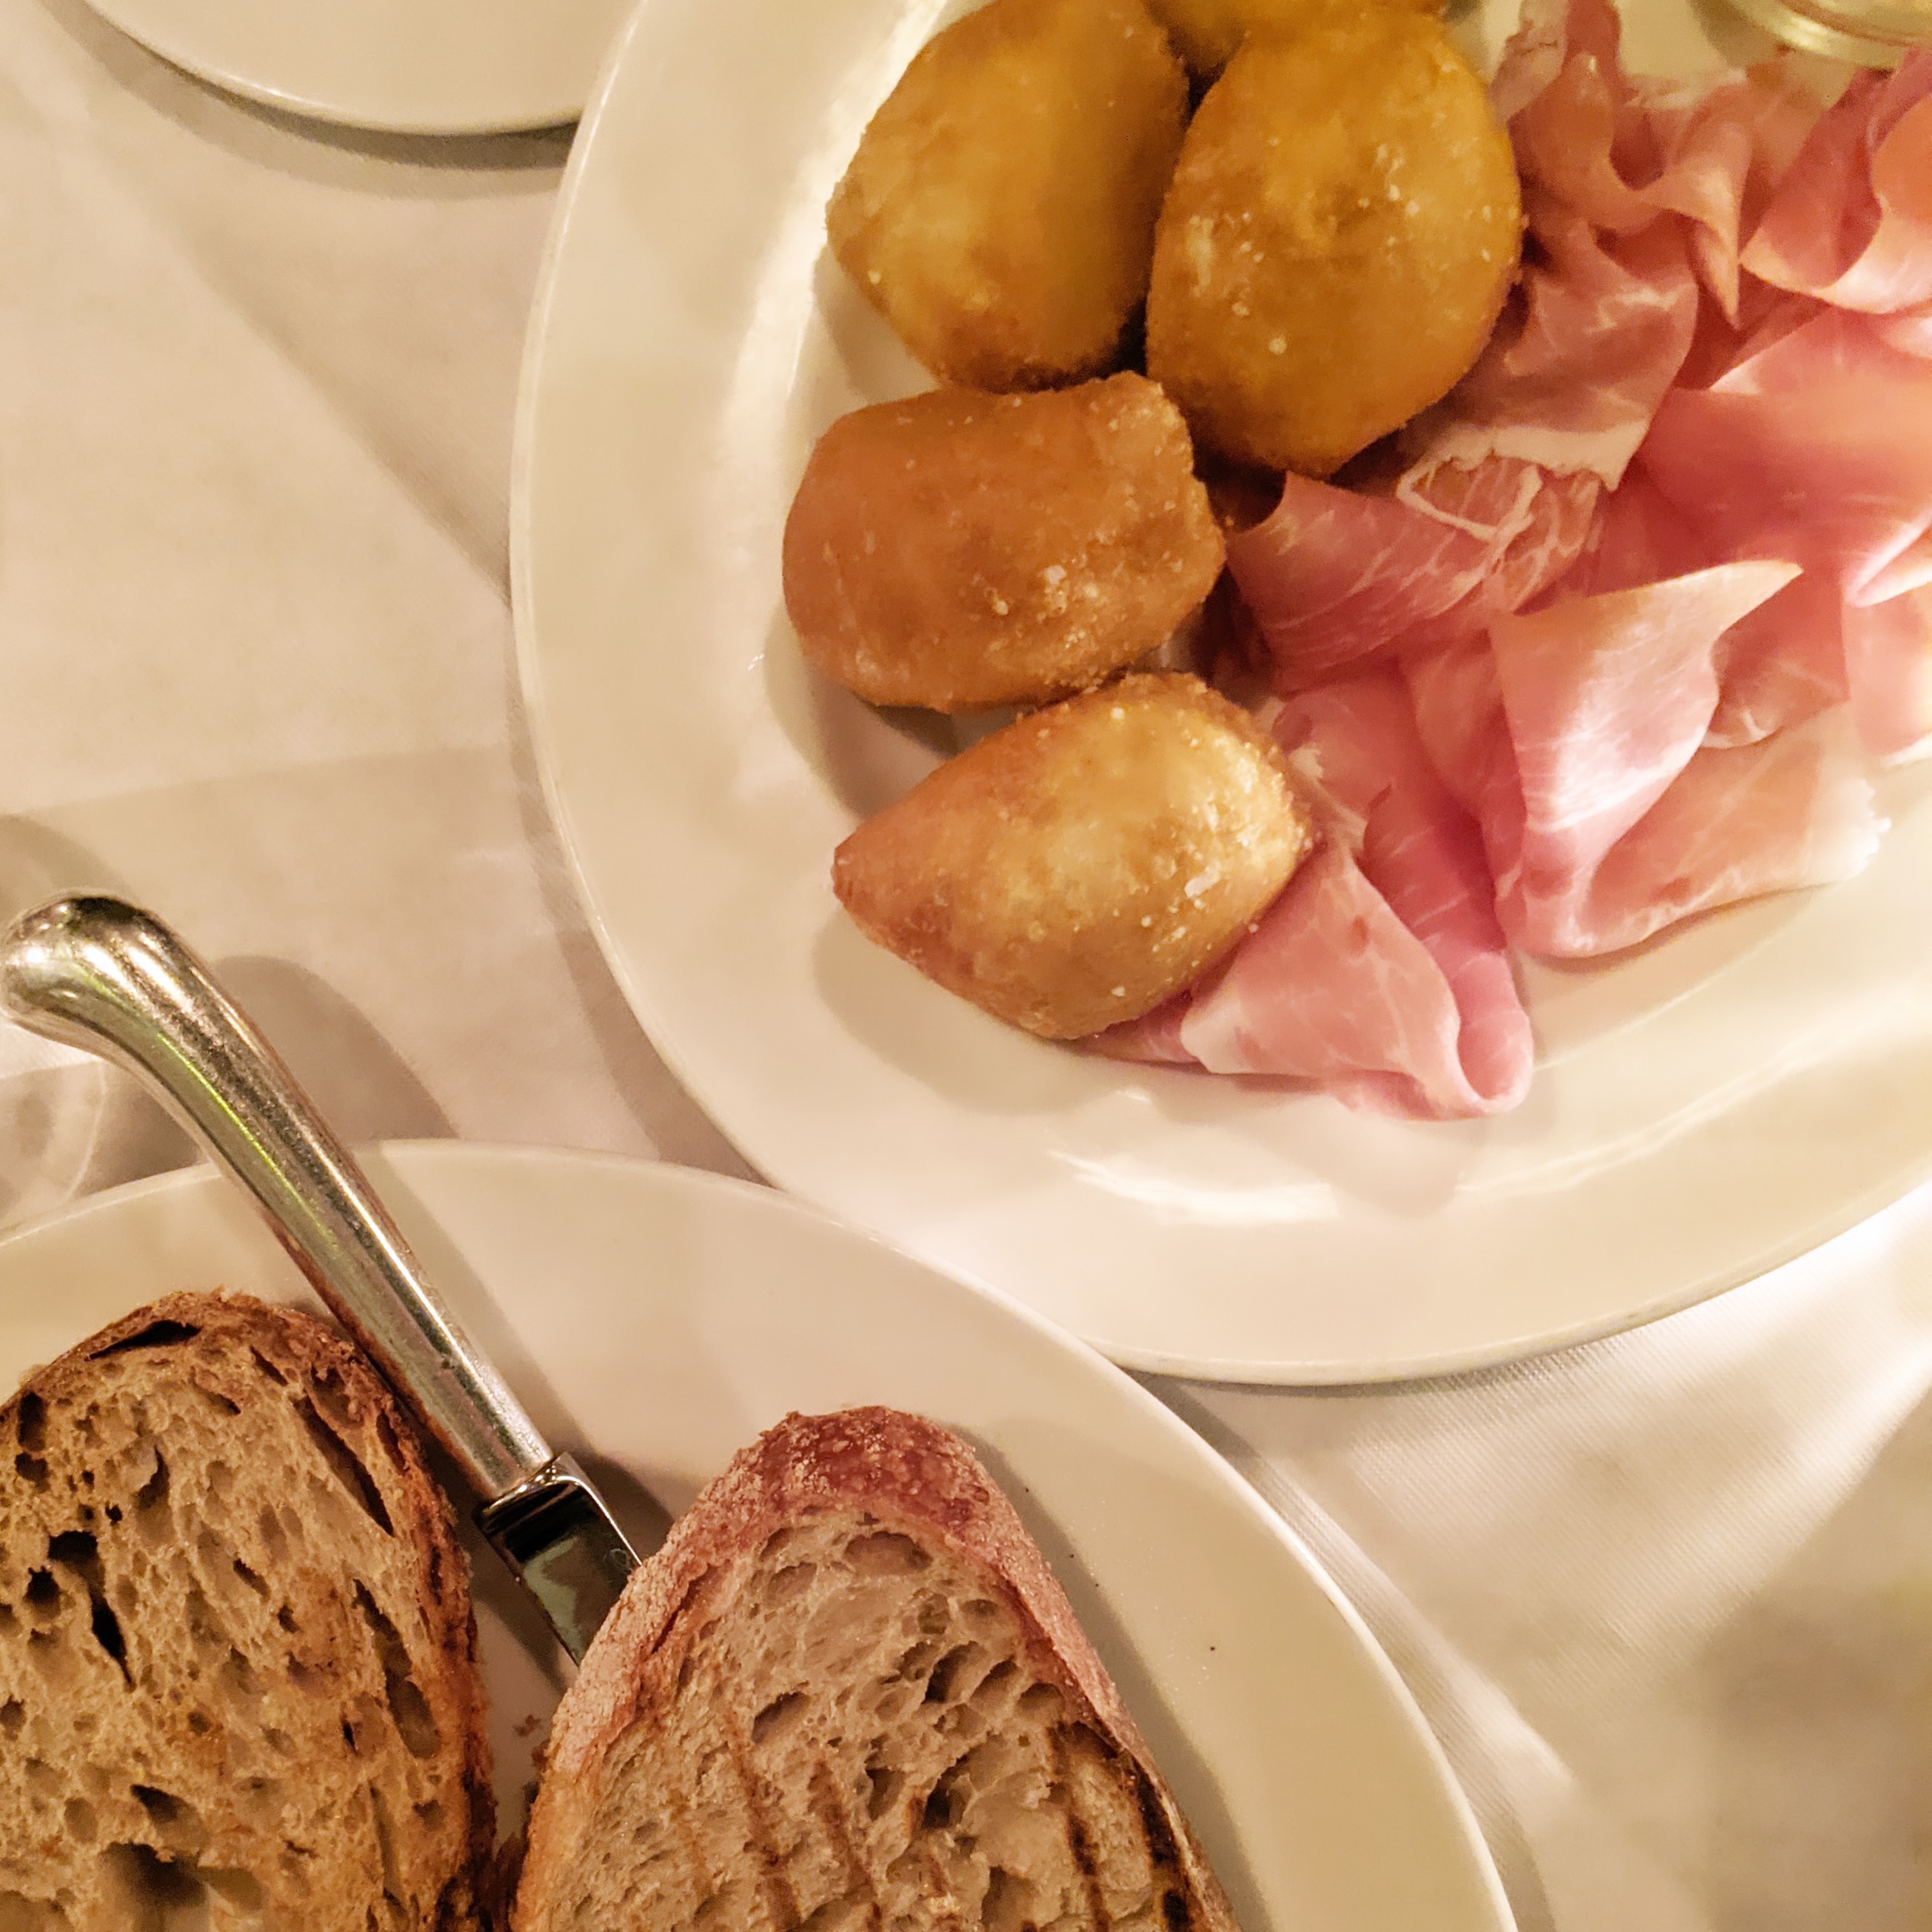 Plate of deep fried Dough cuddles with stracchino cheese and prosciutto at Brutto, one of the most authentic italian restaurants in london